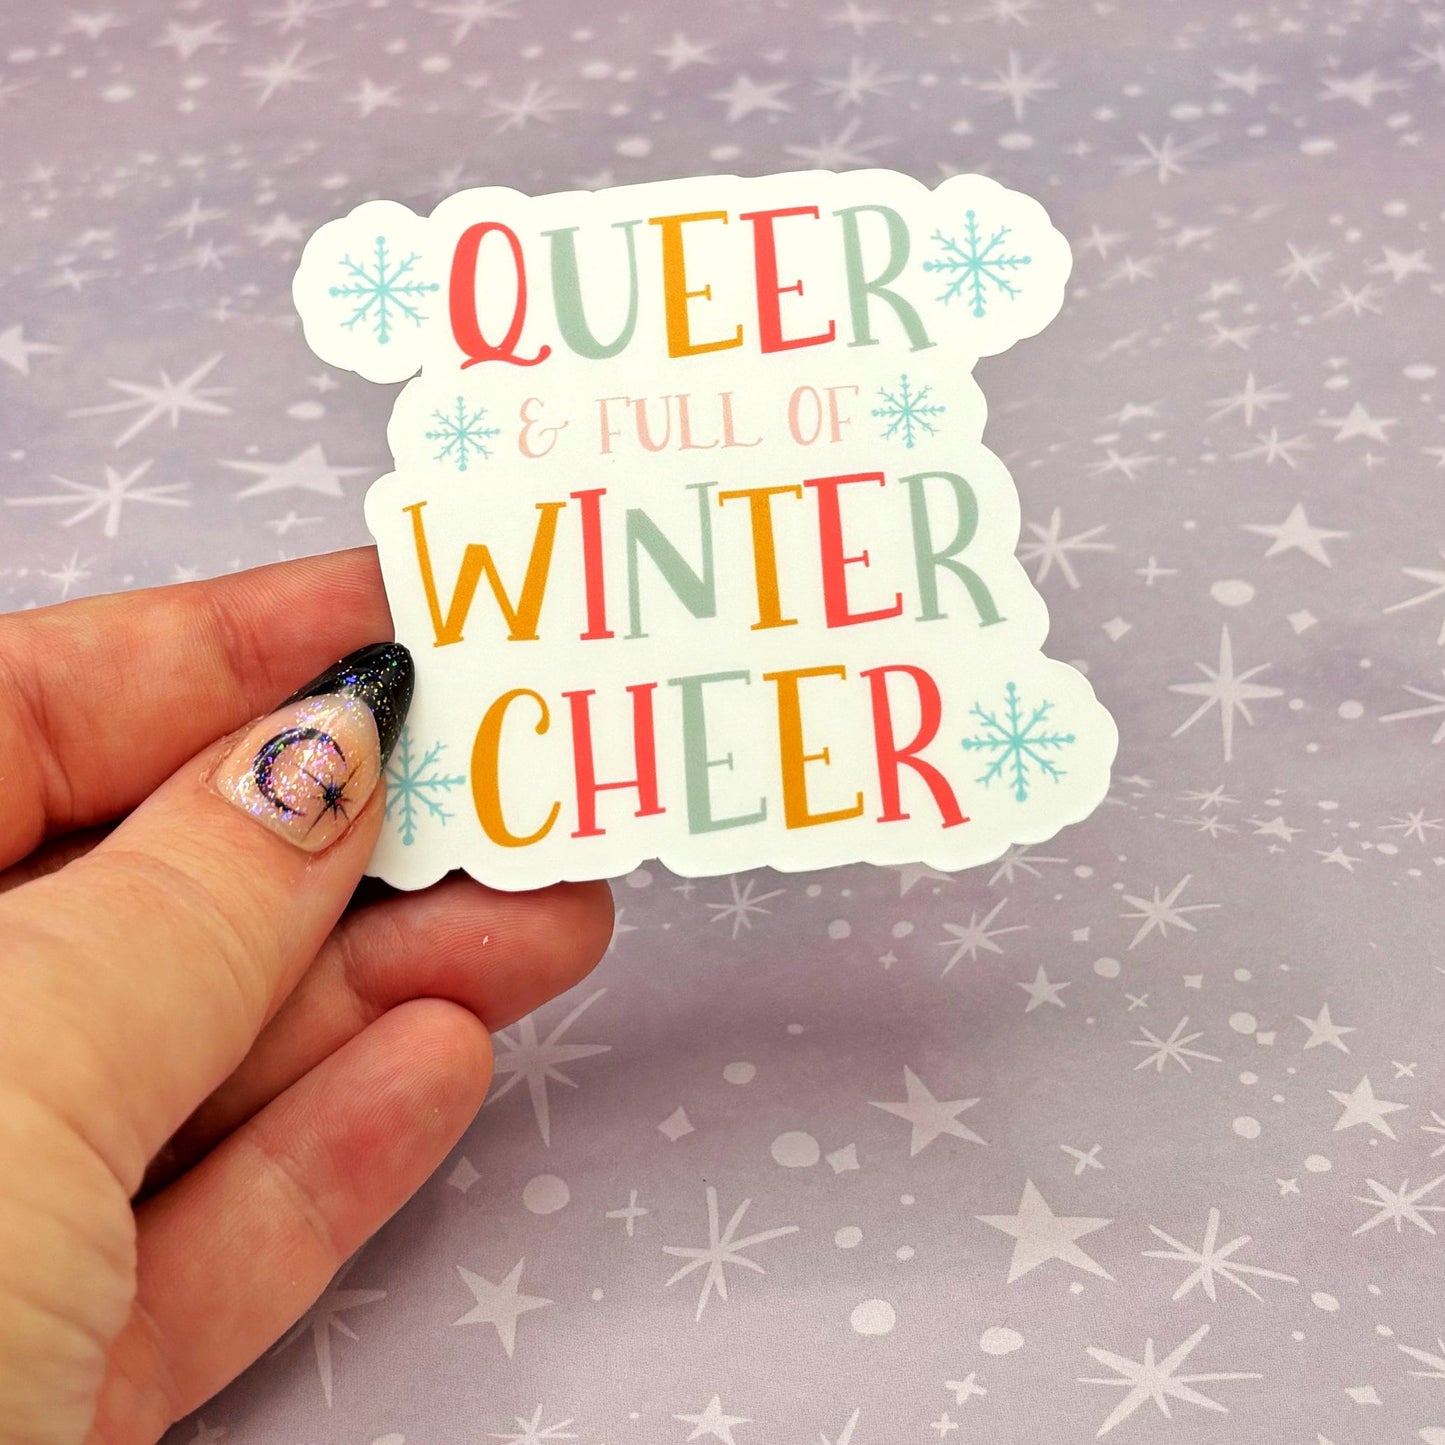 Queer and Full of Winter Cheer Matte Sticker, Queer Holiday Sticker, LGBTQ Sticker for Best Friend, Holiday Stickers for BFF, Gay sticker